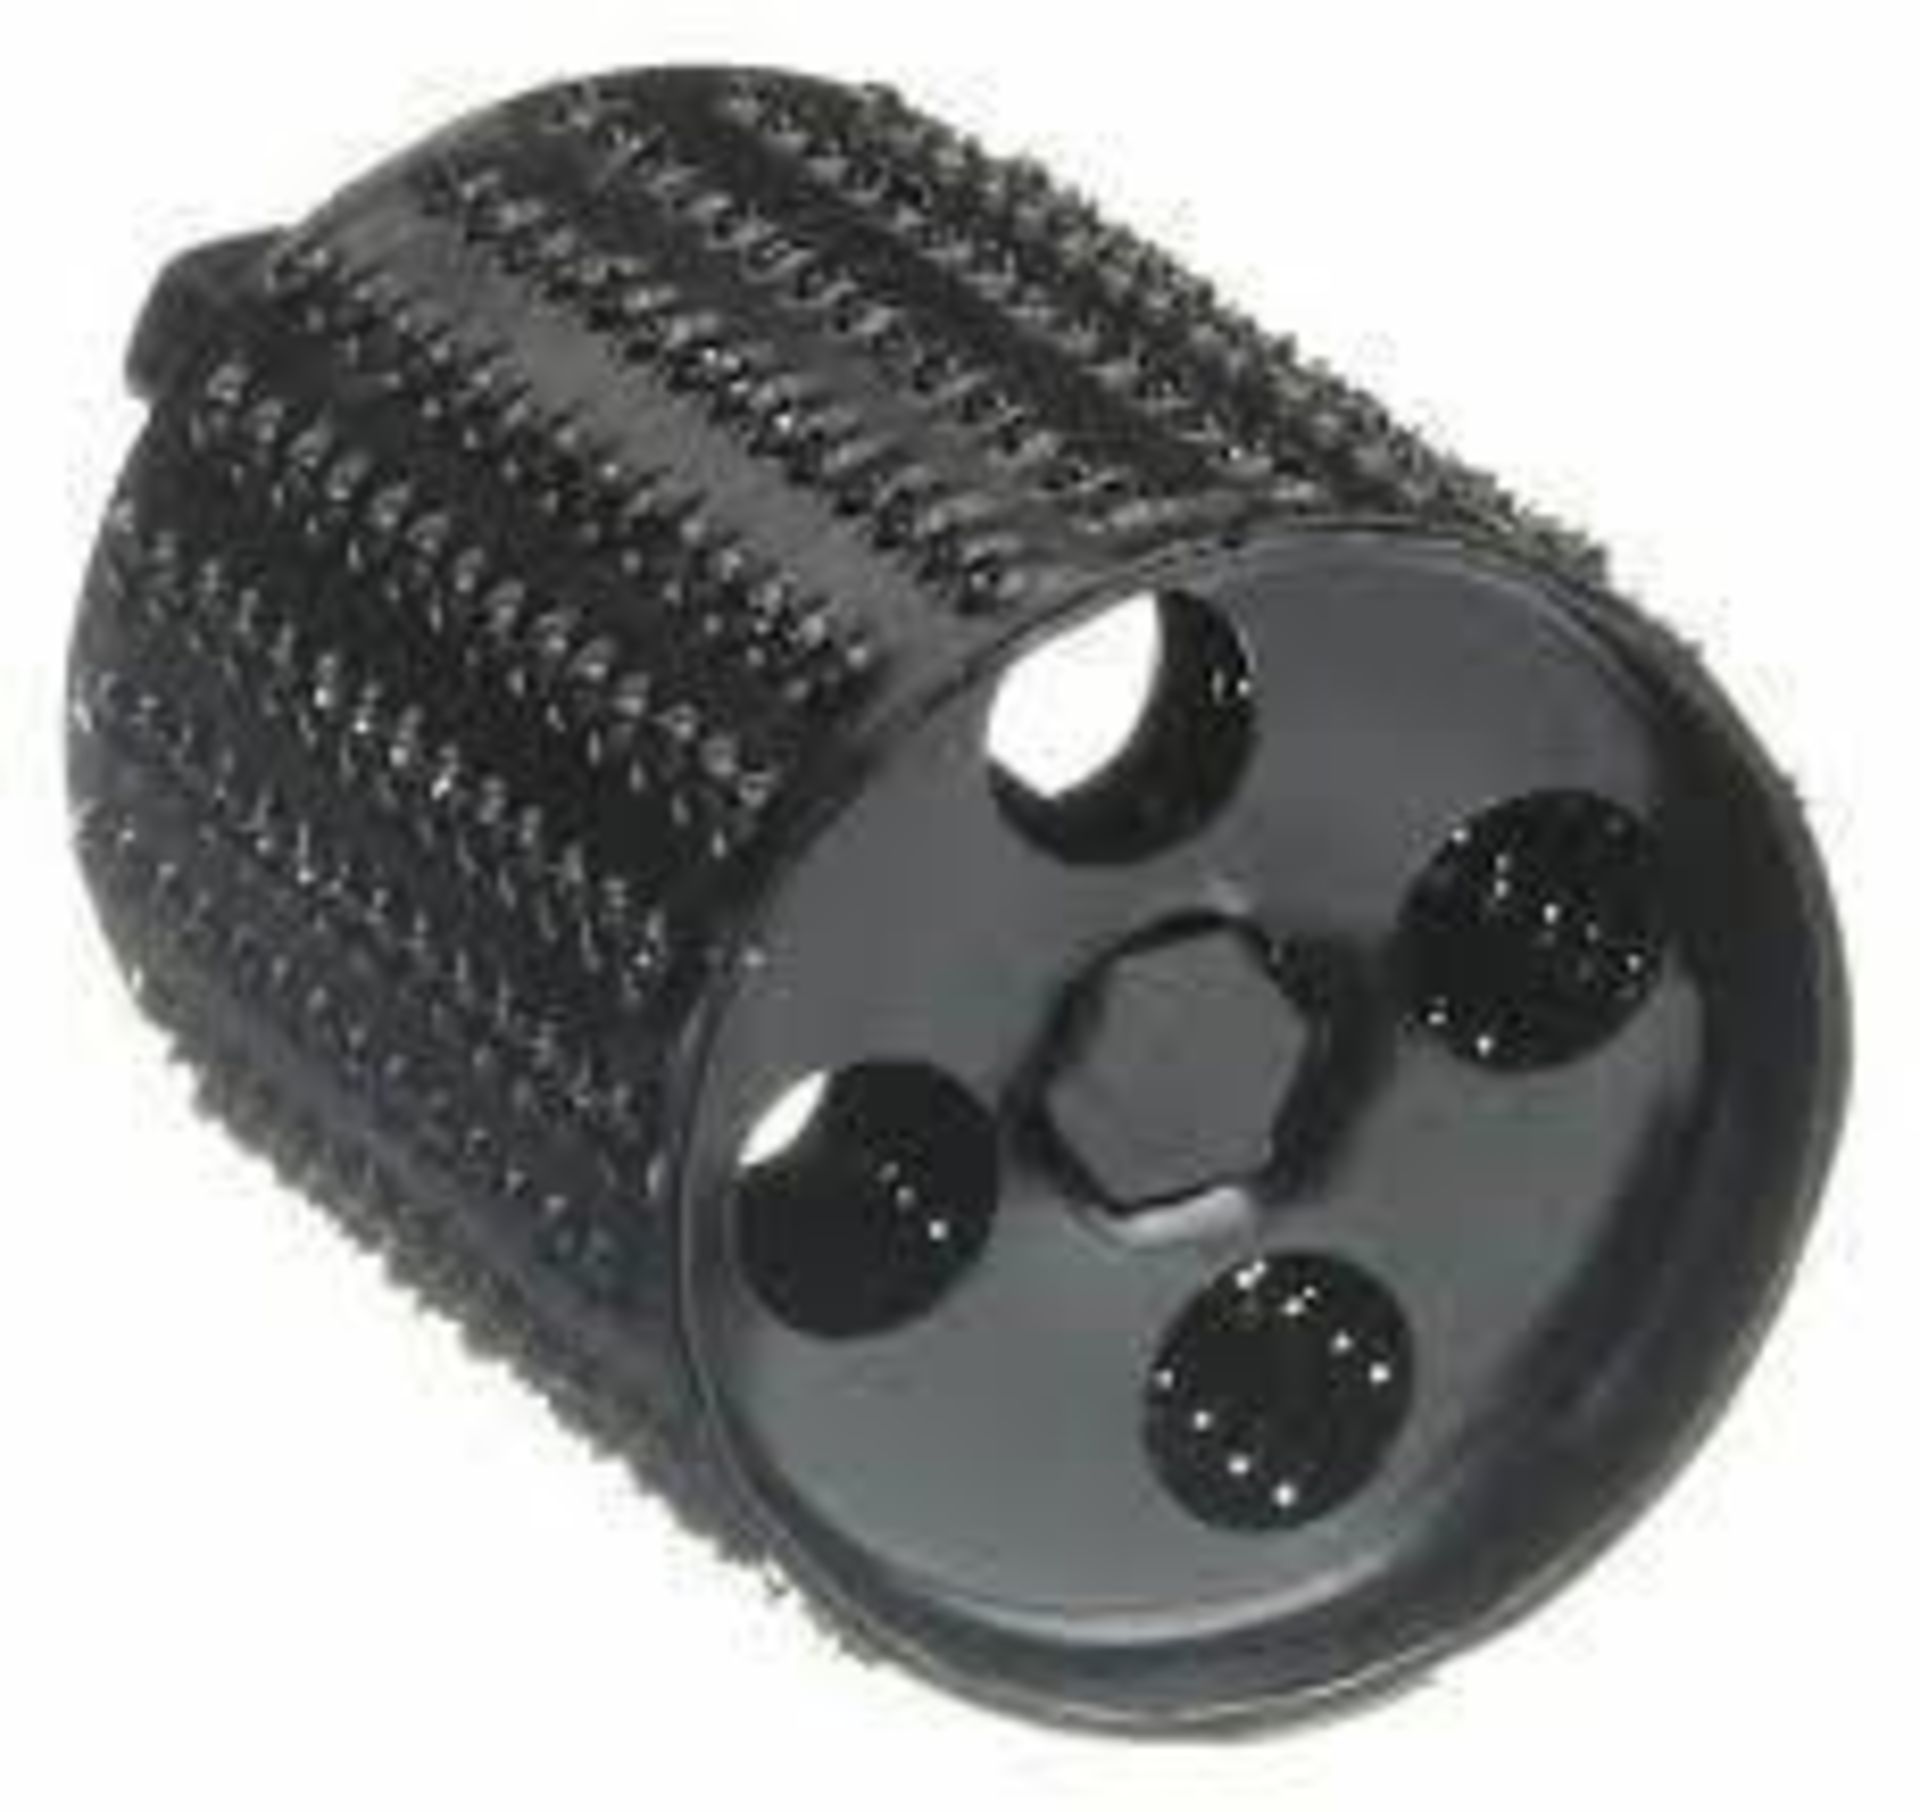 (600) 1-1/4" ROTARY DRUM RASP BRAND/MODEL: EAZY POWER INFORMATION: 2 BOXES RETAIL$: $11.98 EACH SIZE